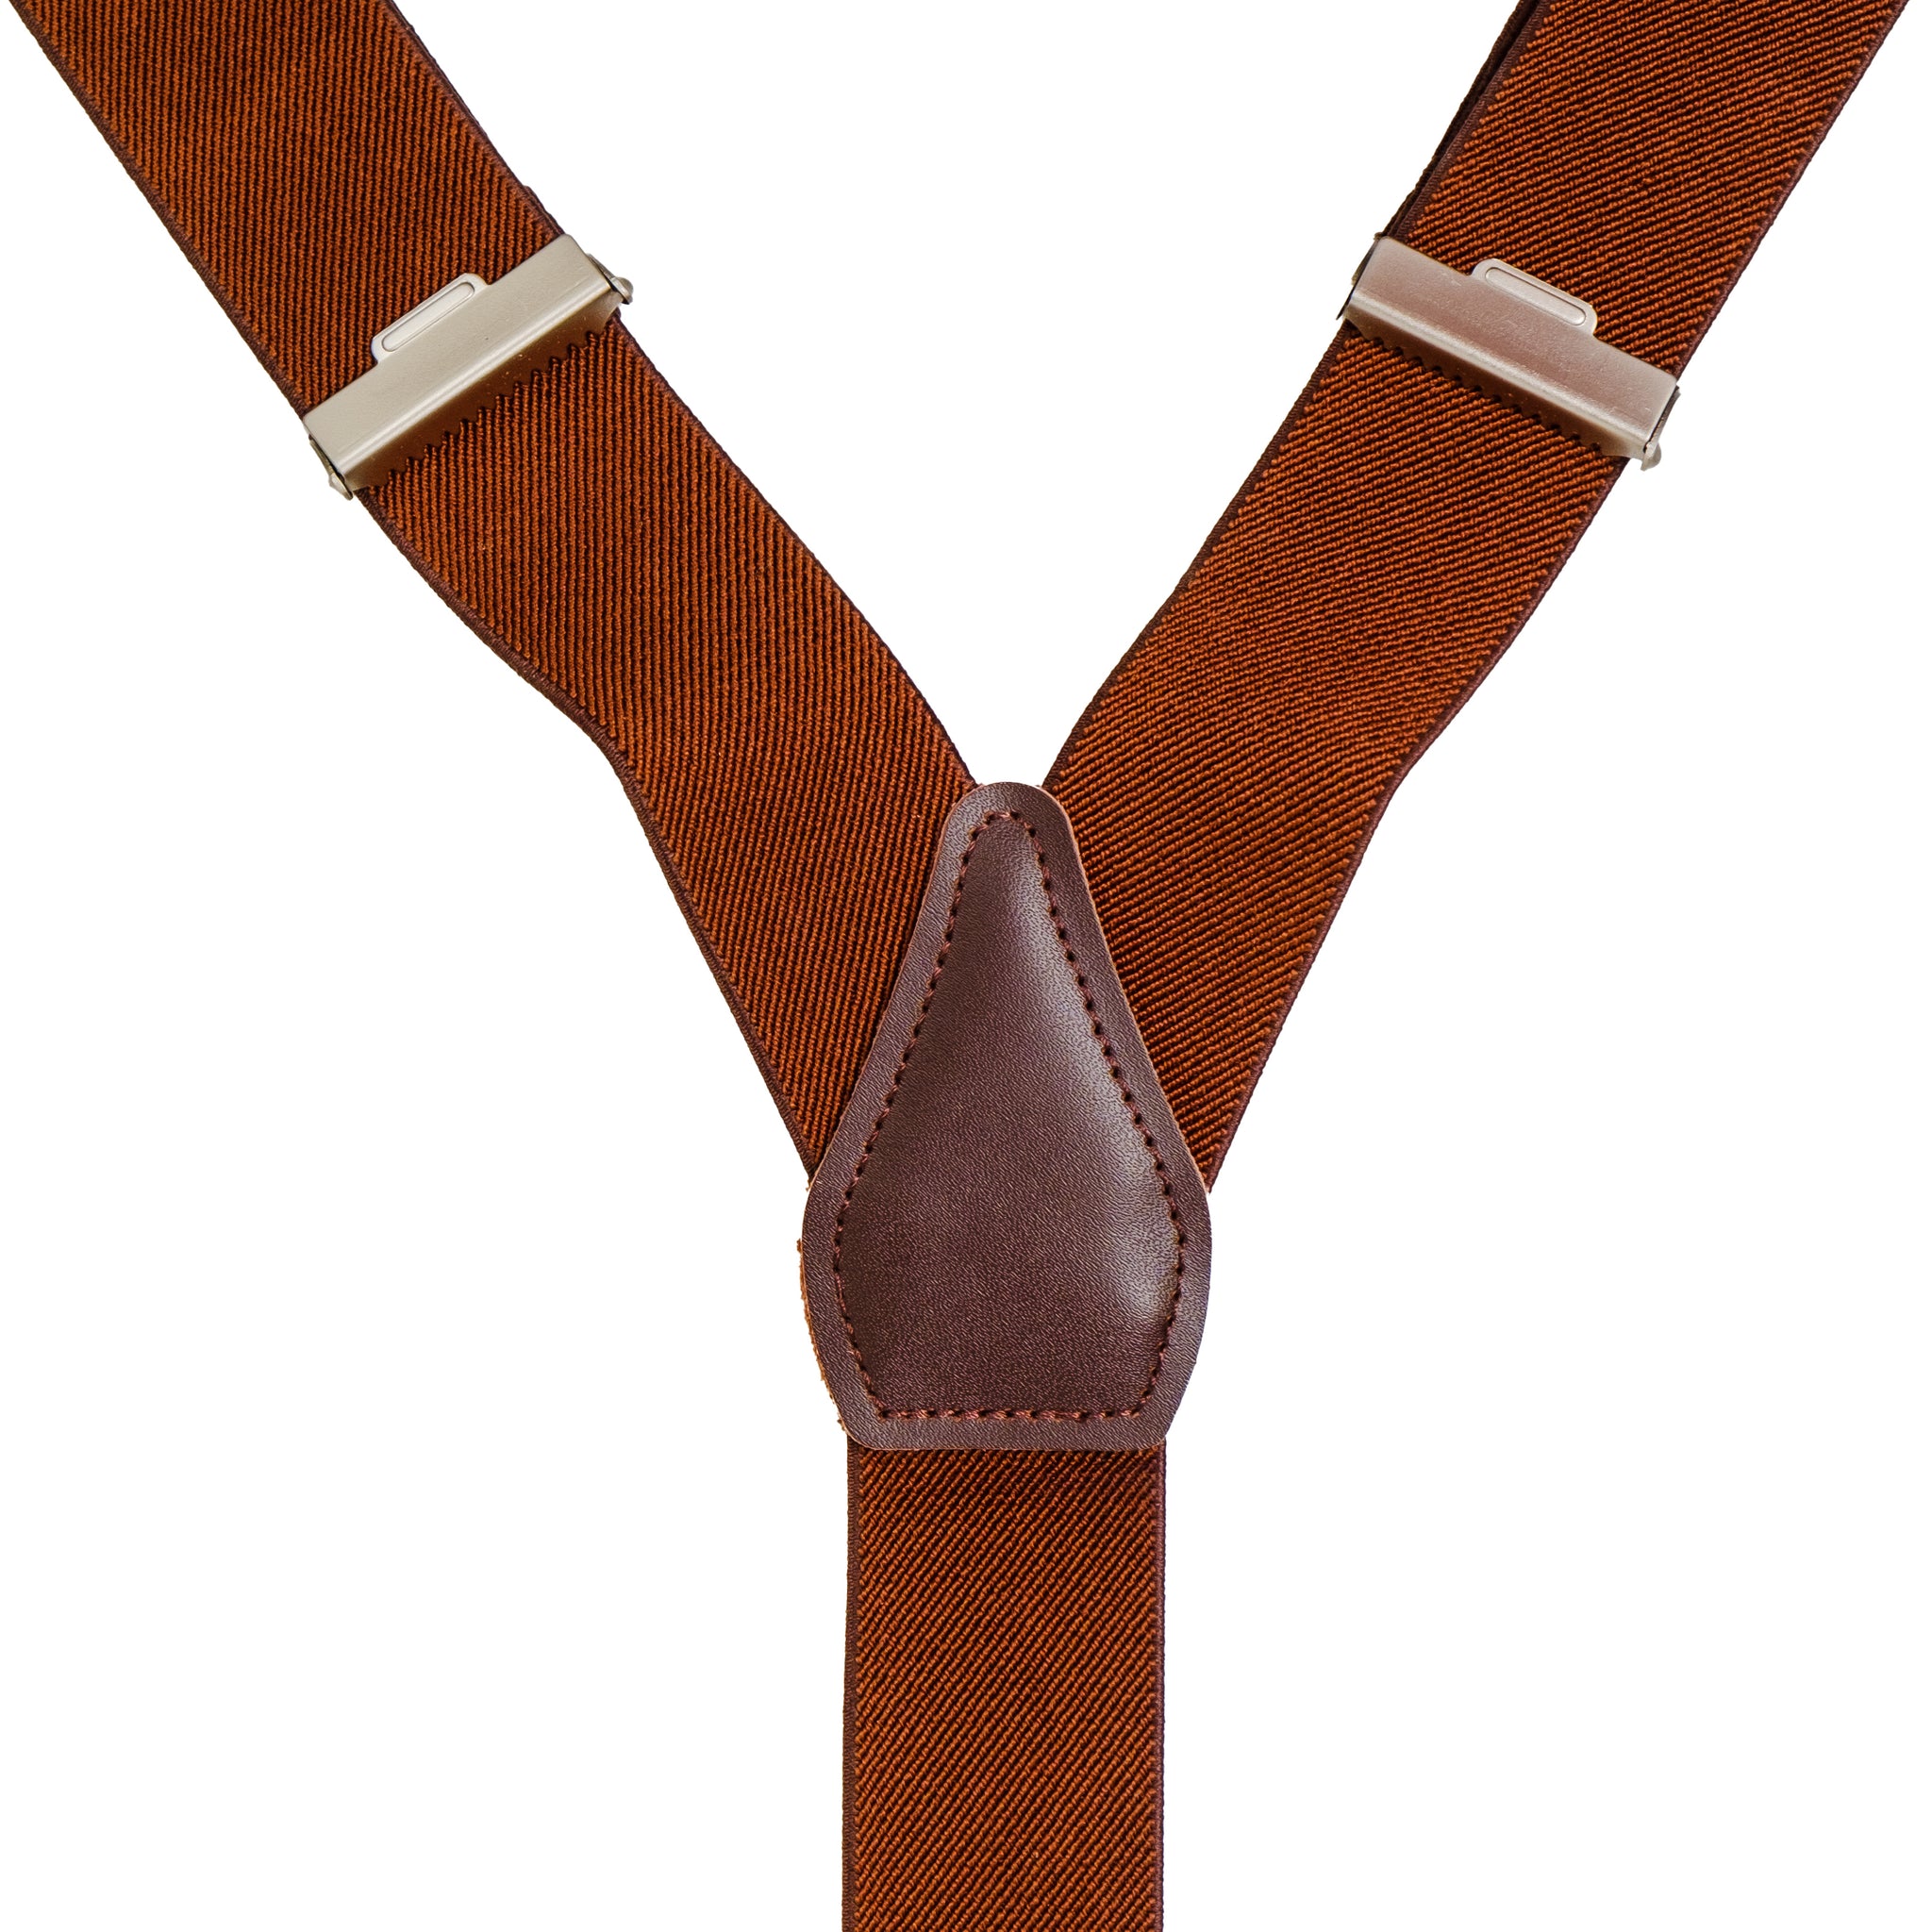 Chokore Y-shaped Suspenders with Leather detailing and adjustable Elastic Strap (burgundy)